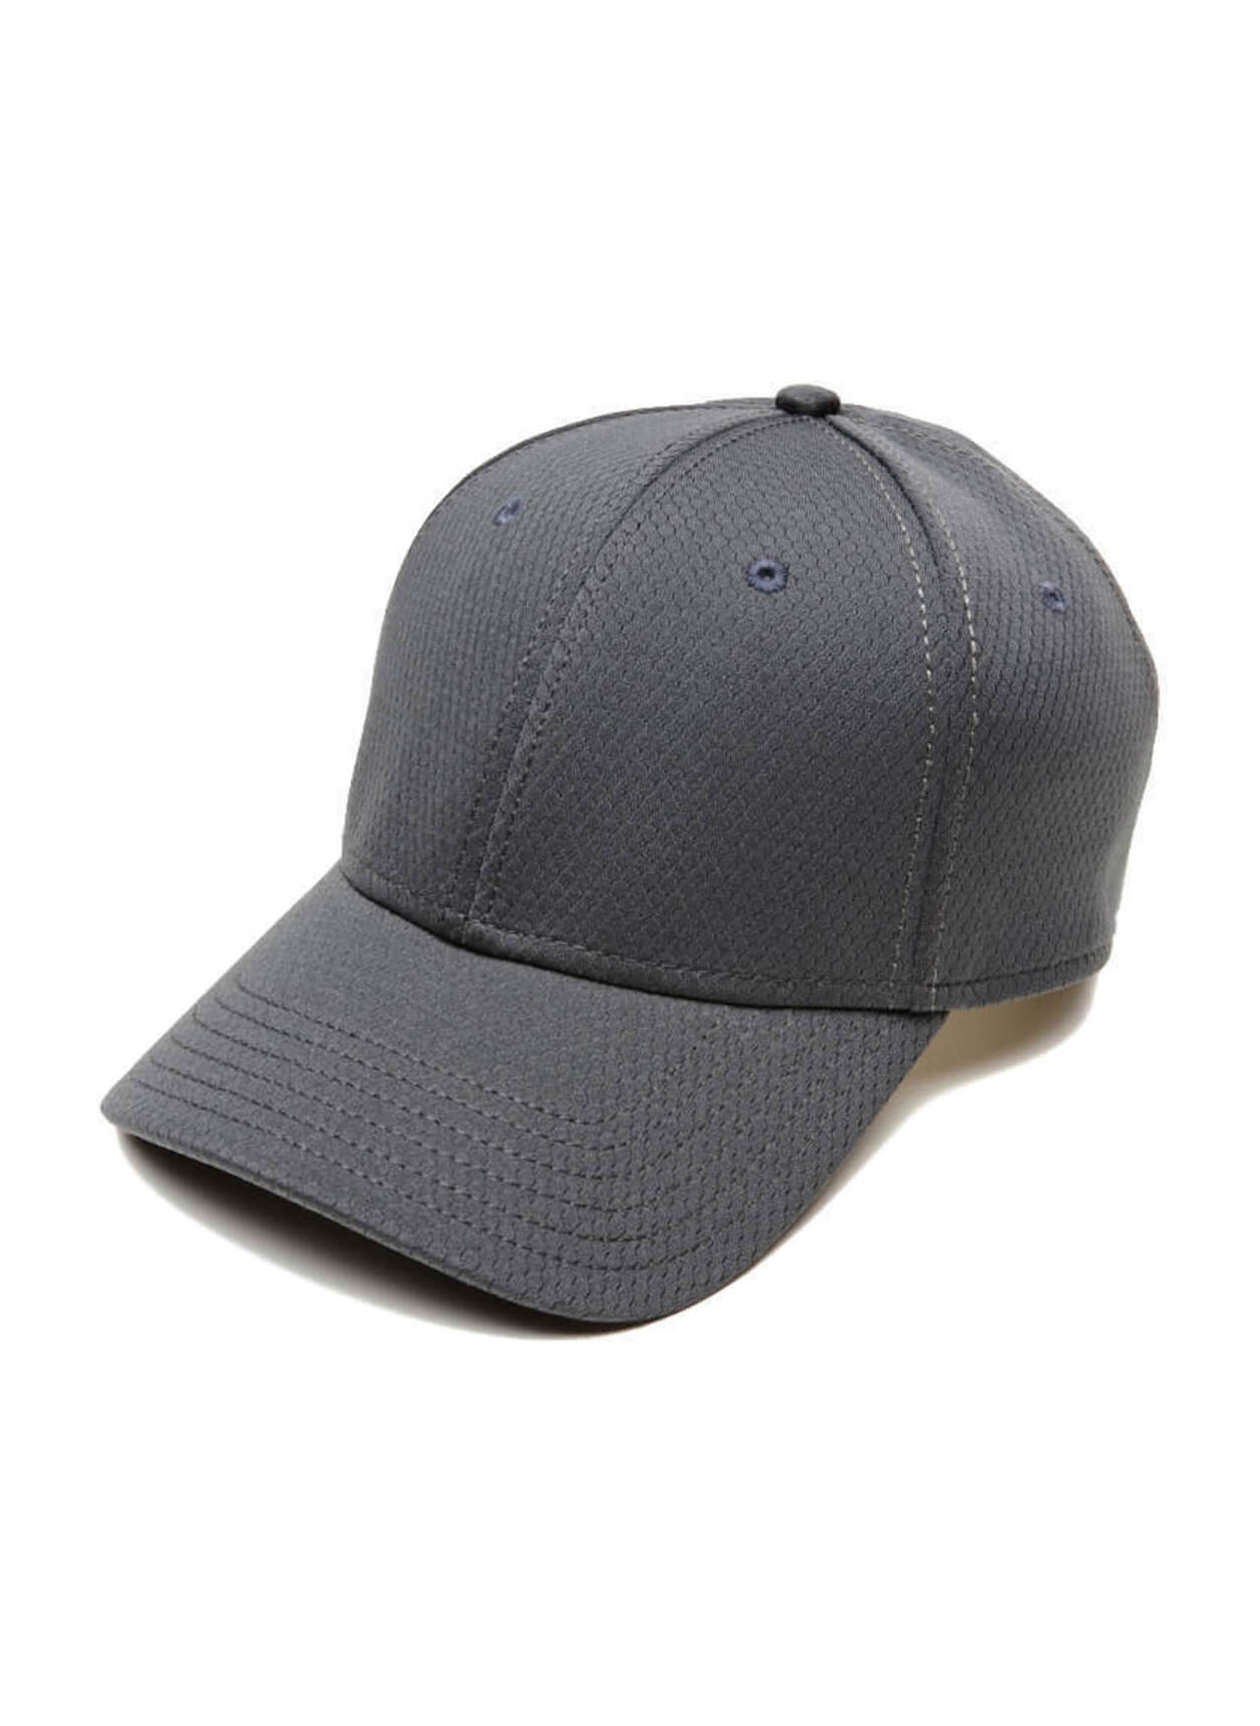 Callaway Charcoal Tour Performance Hat